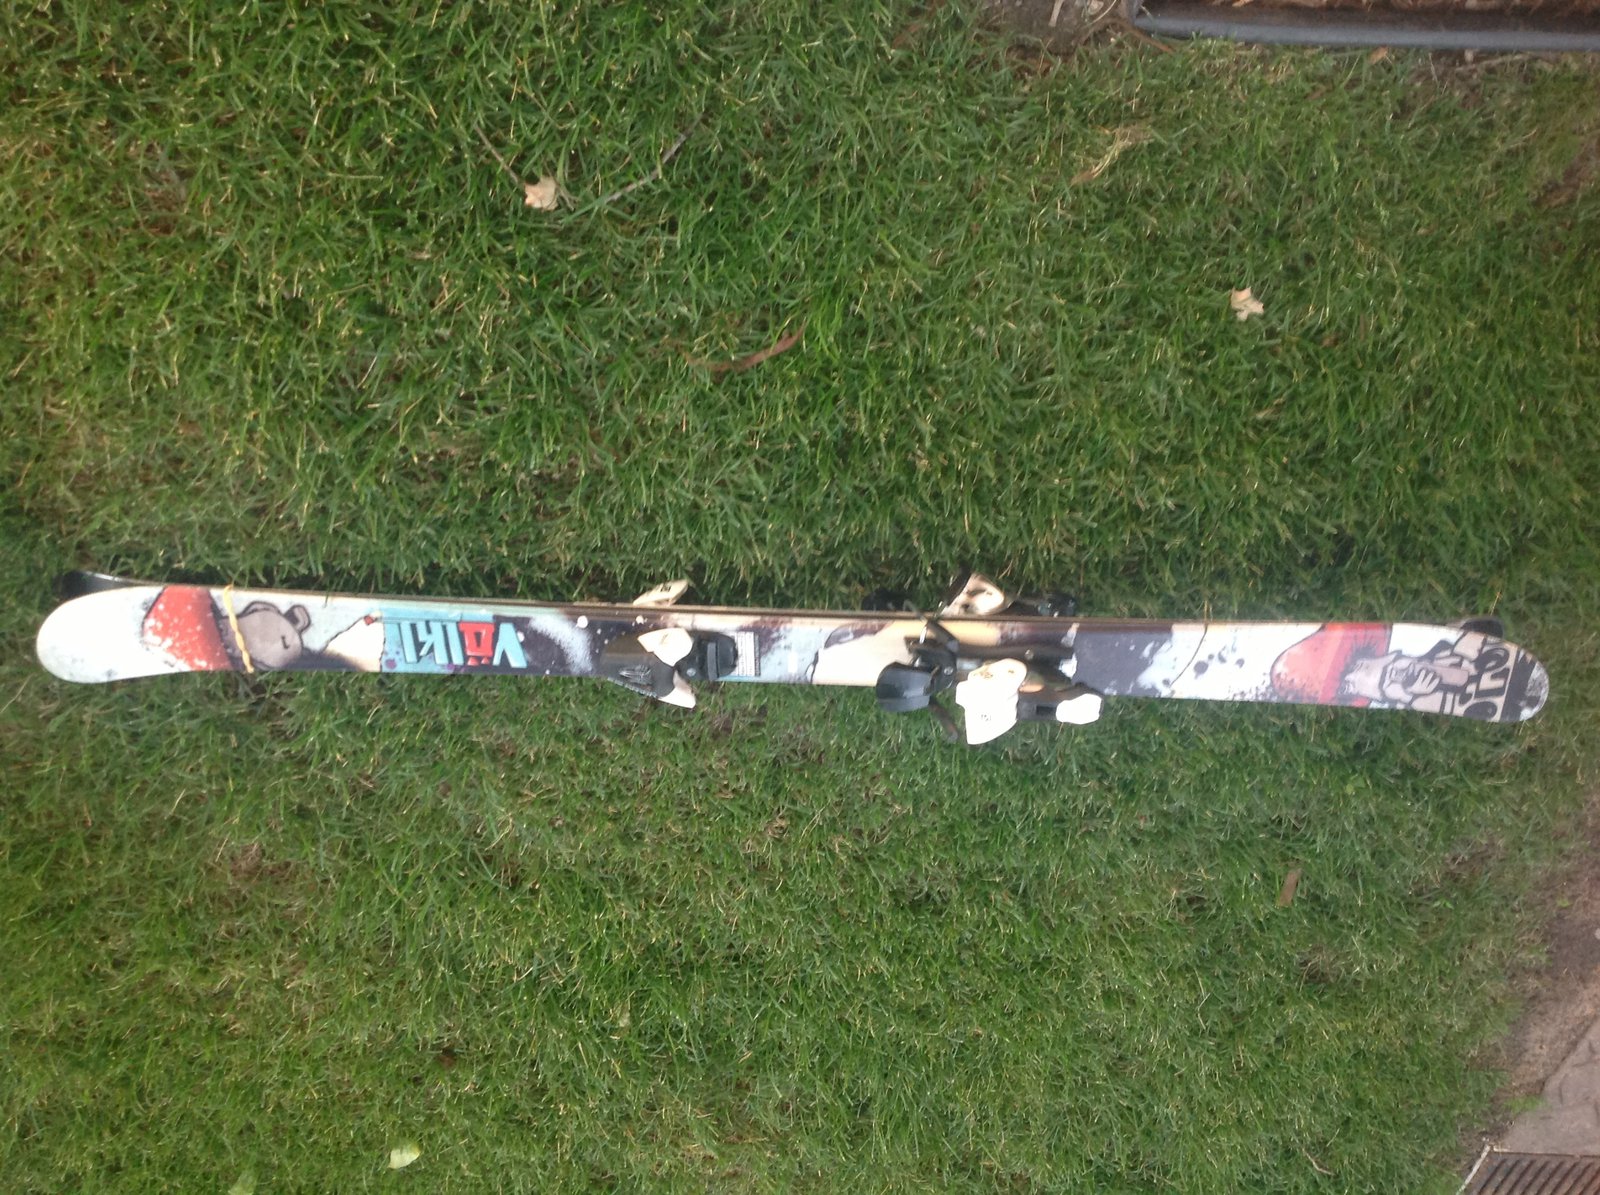 Skis For Sale! Used 8-10 times